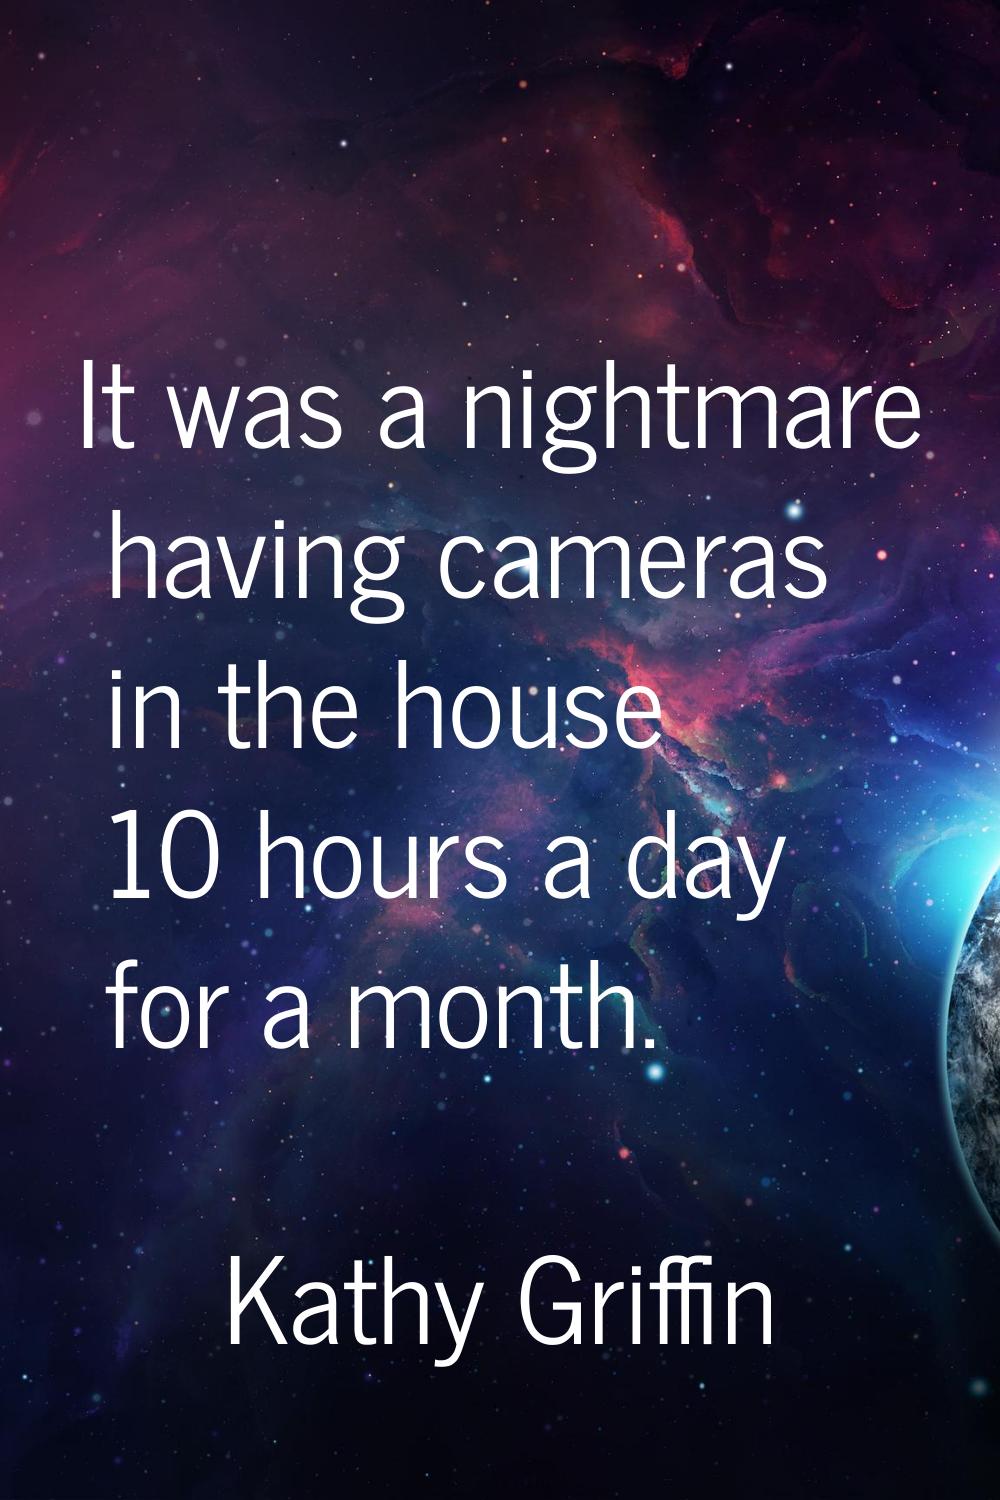 It was a nightmare having cameras in the house 10 hours a day for a month.